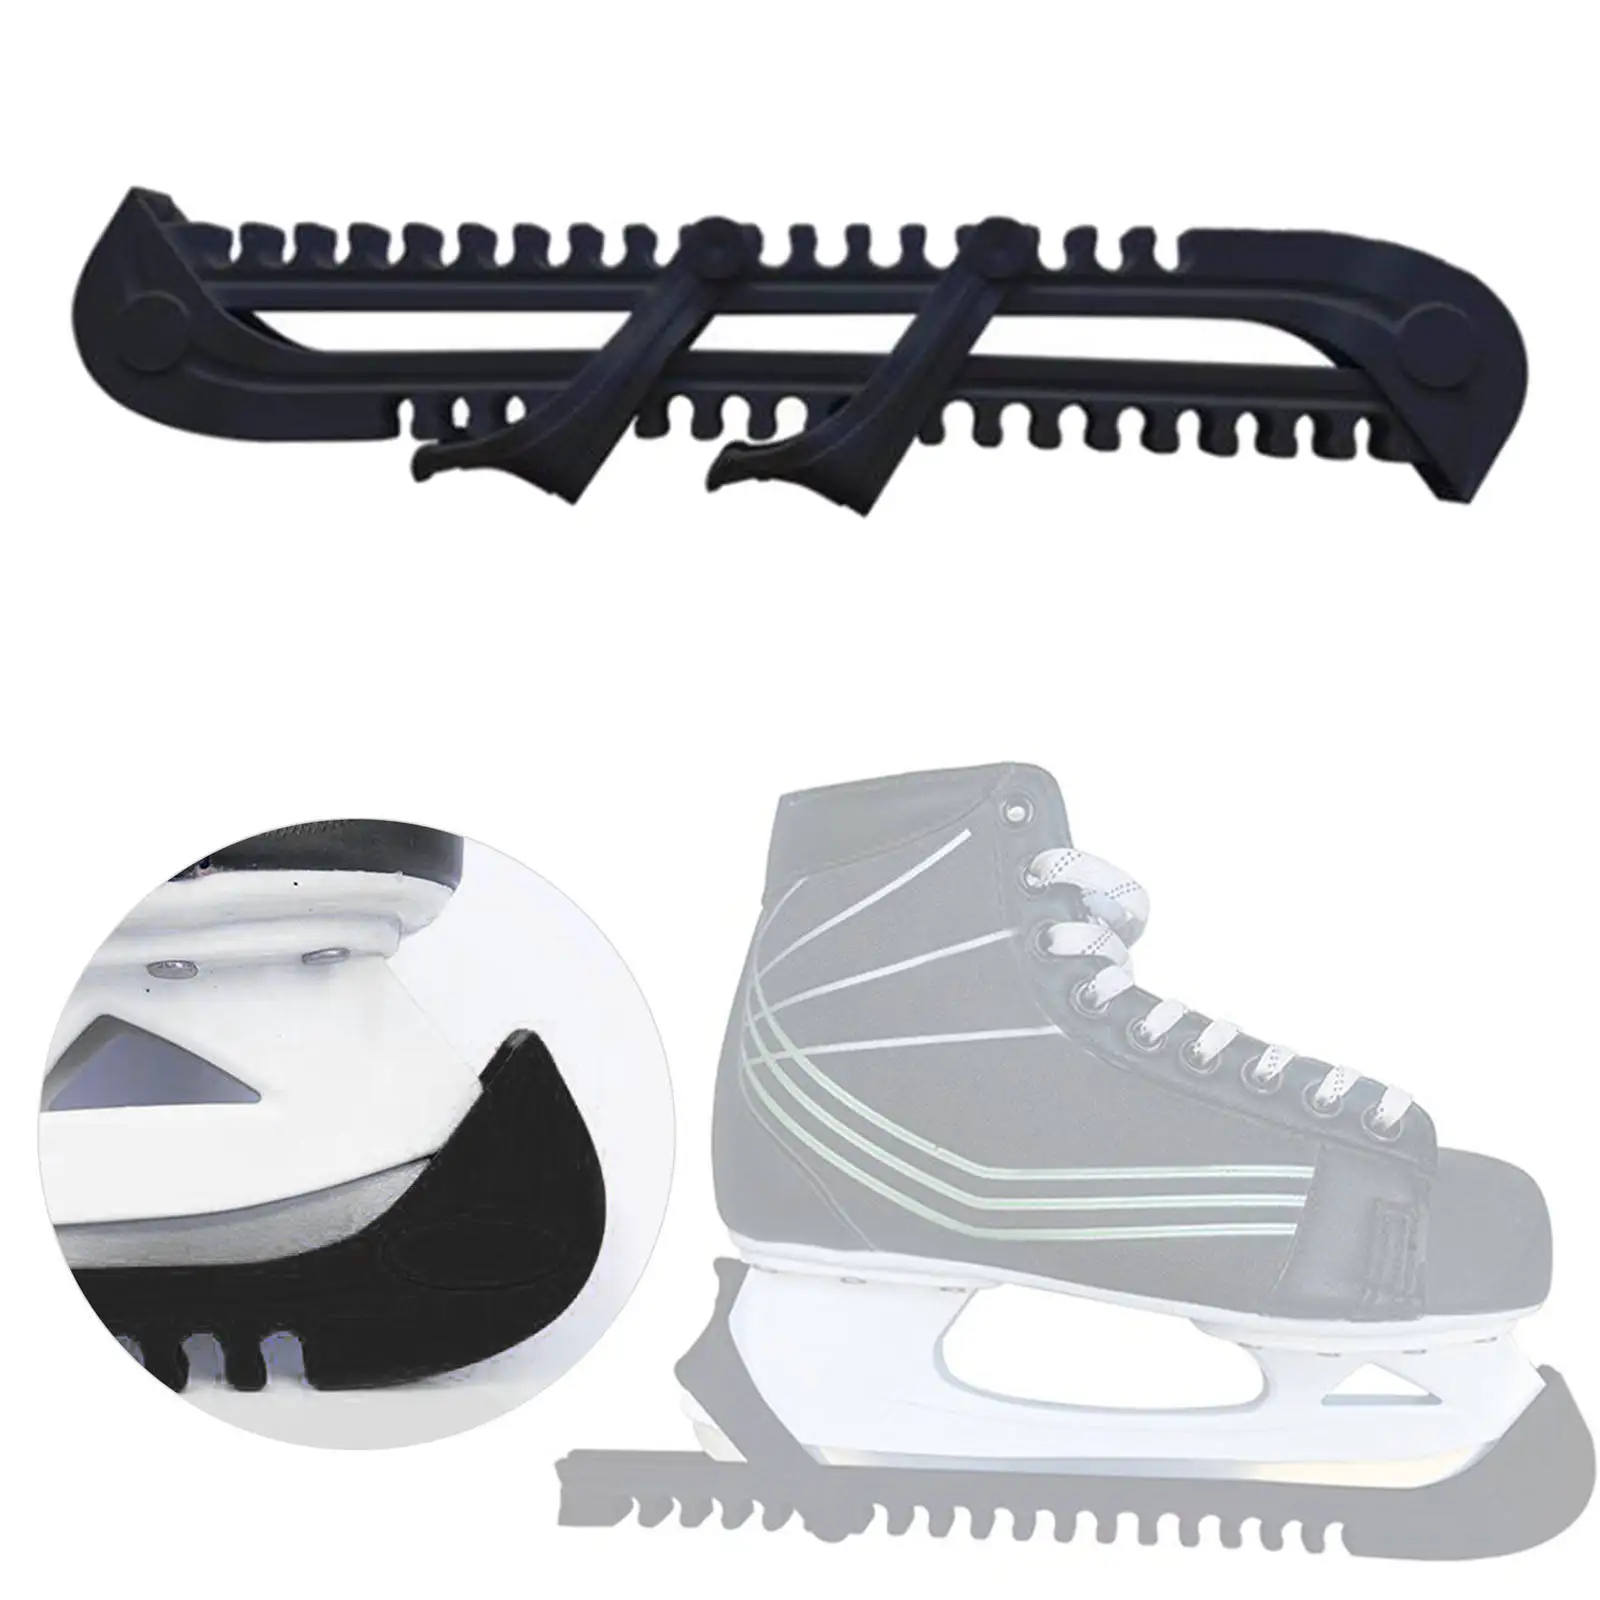 Skate Blade Guards Spare Parts Adjustable Accessories Universal Ice Figure Skating Blade Covers